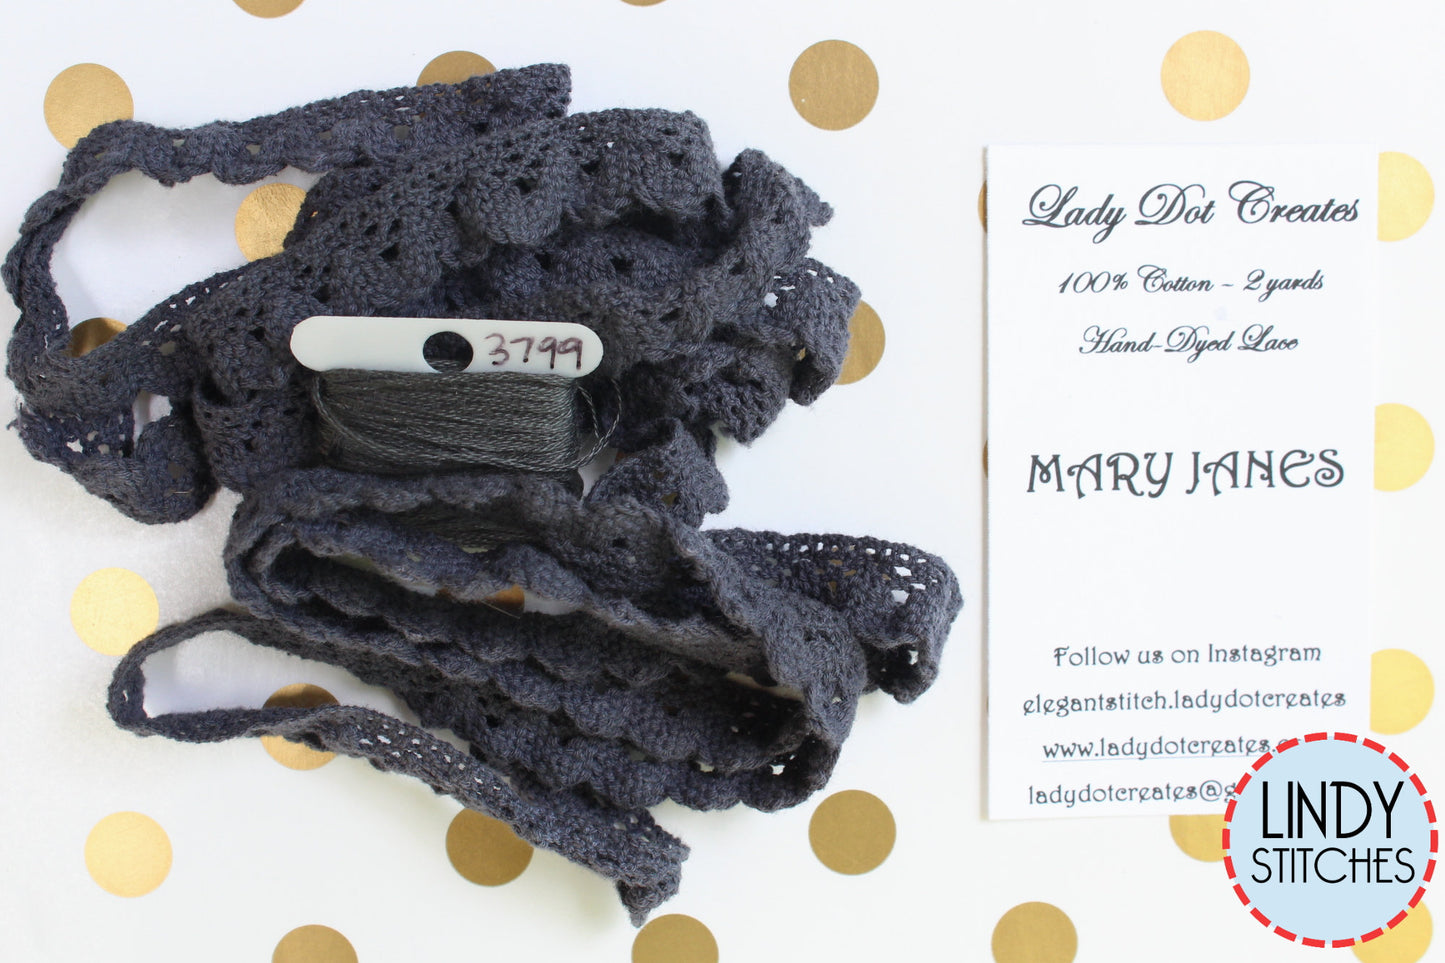 Mary Janes Lace Hand Dyed 100% Cotton Lace by Lady Dot Creates